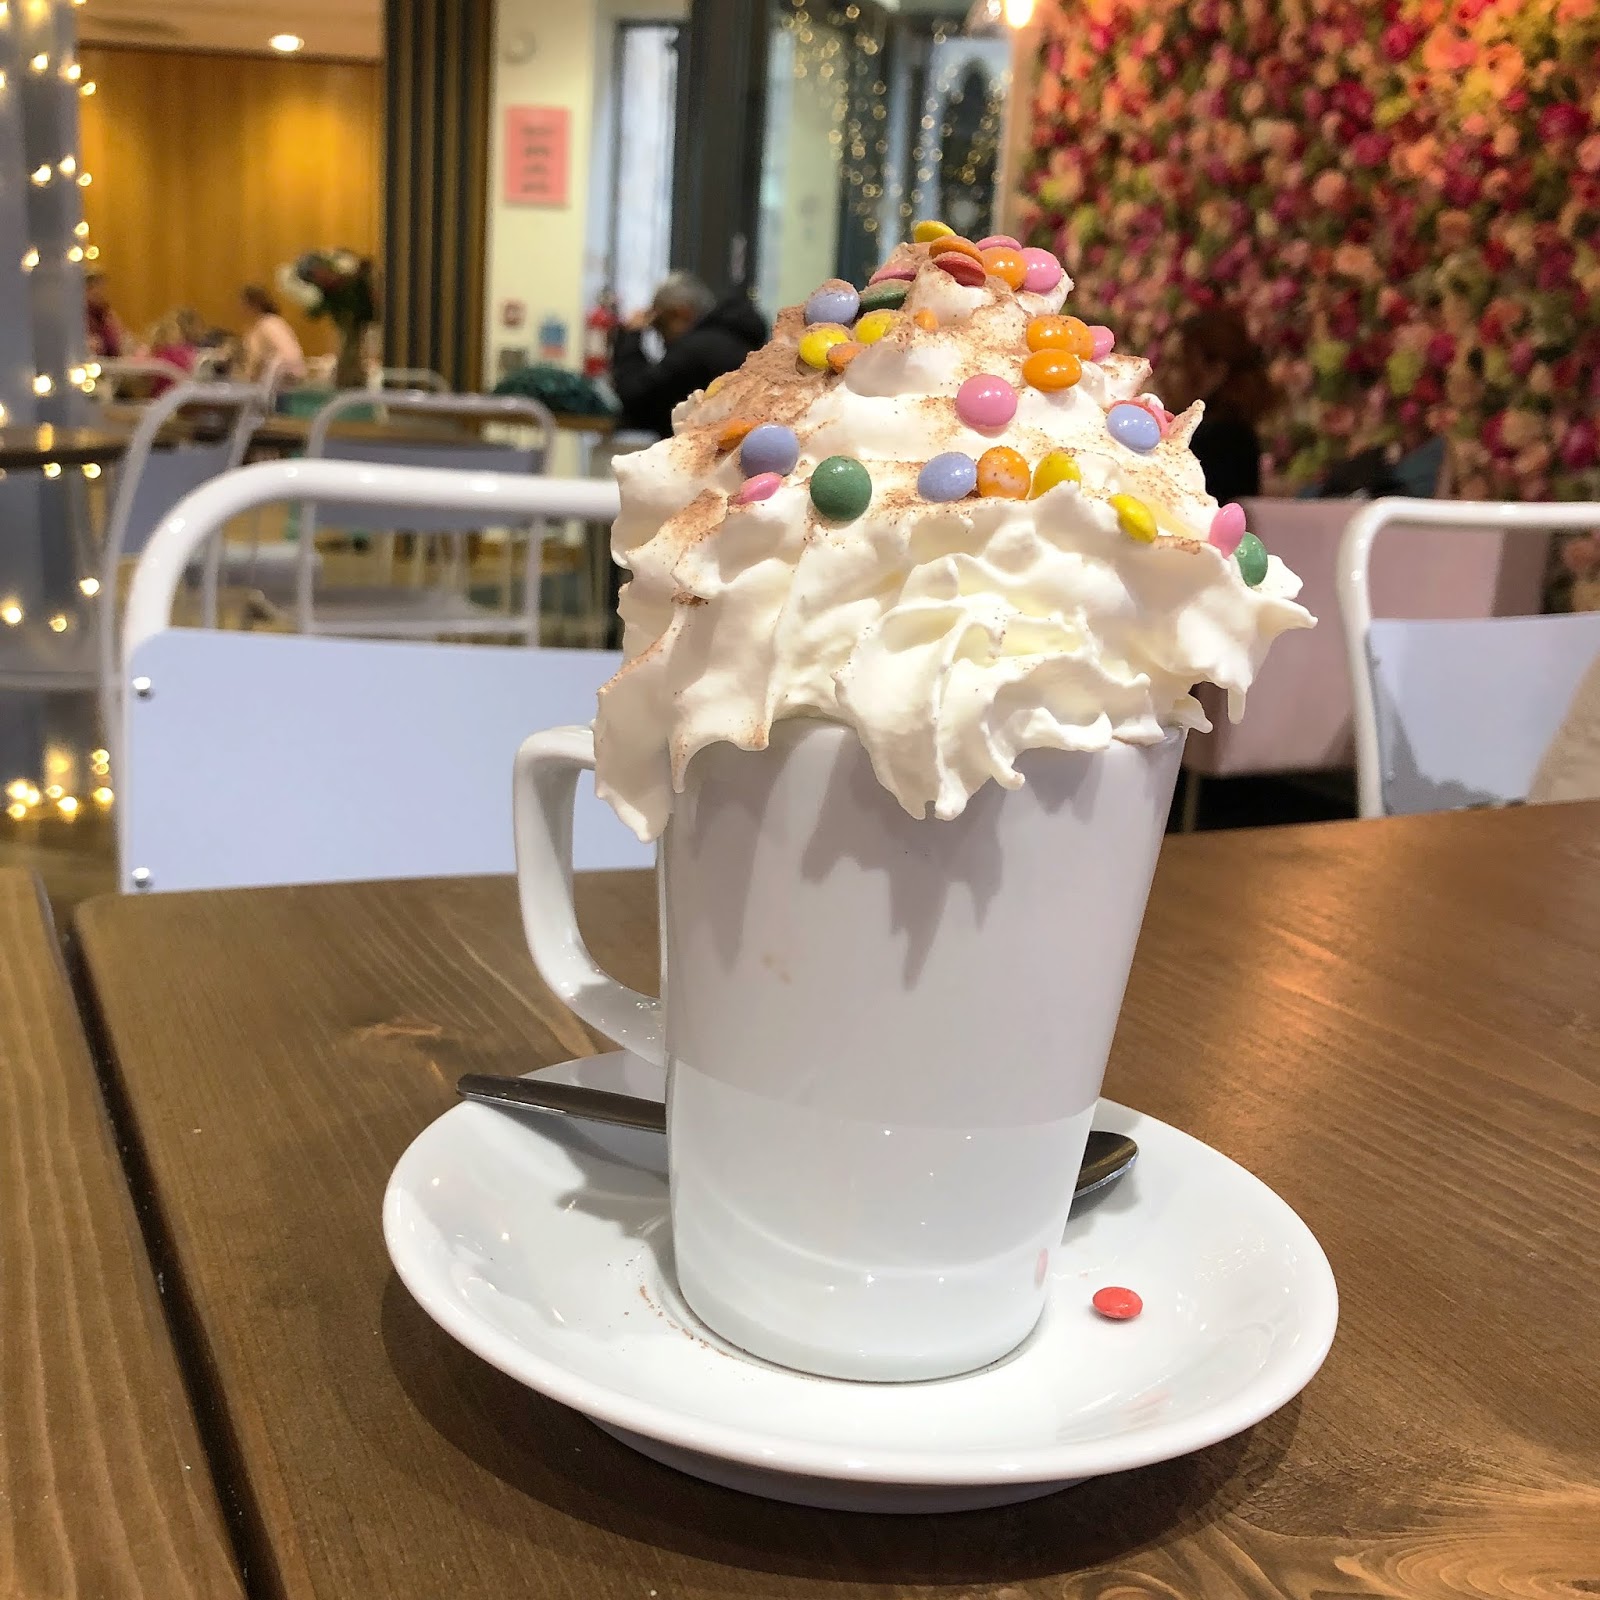 Best Hot Chocolate North East - Cafe 1901